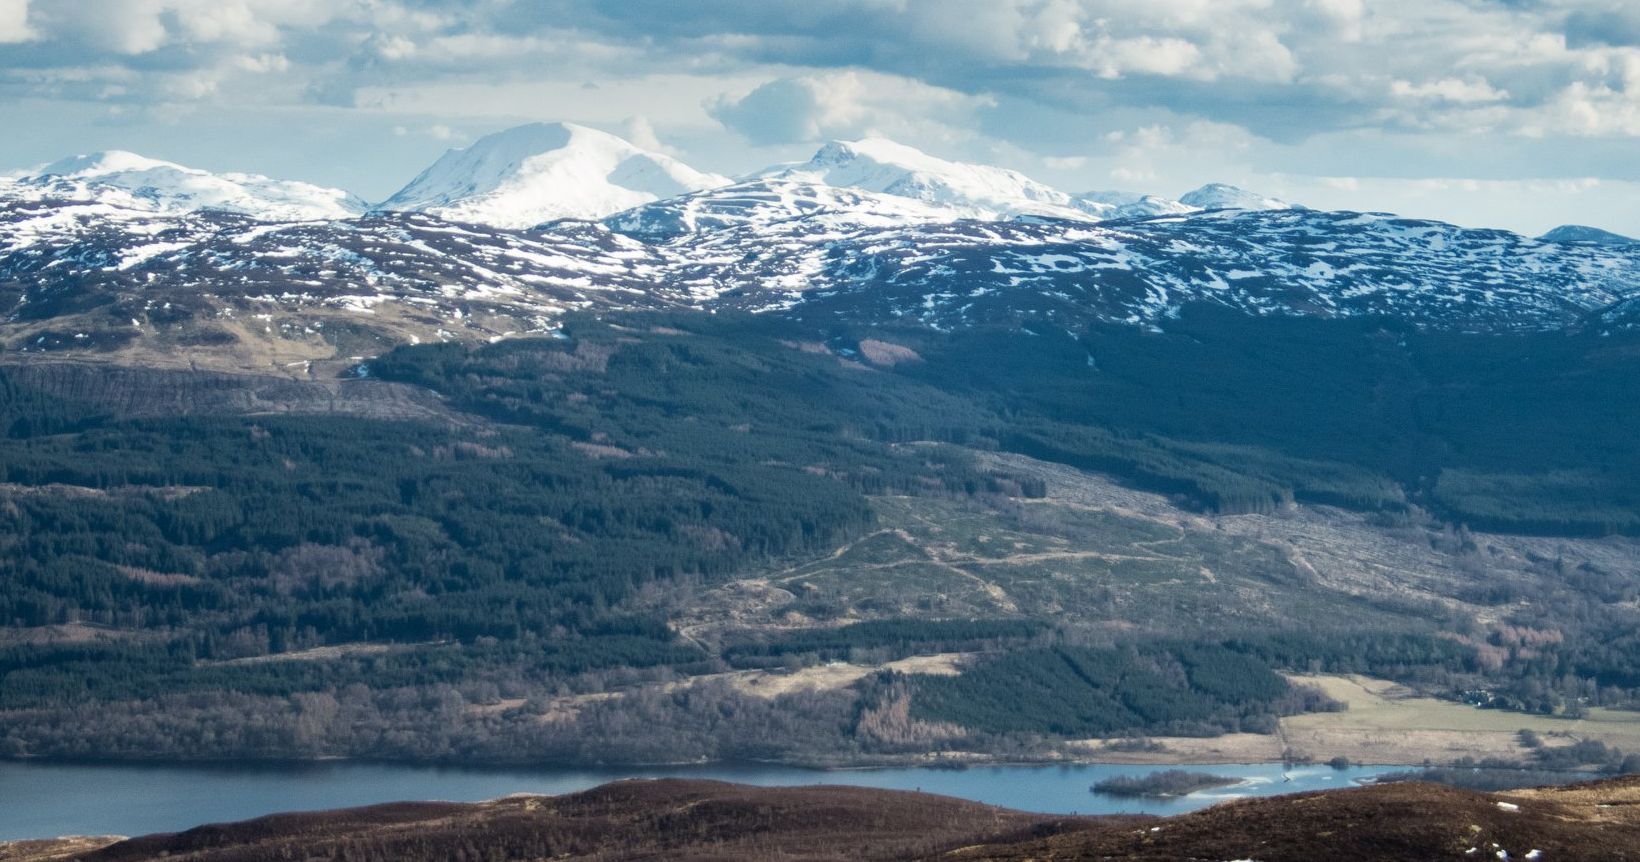 Meall na Fearna, Ben Vorlich, Stuc a'Chroin and Beinn Each above Loch Tay